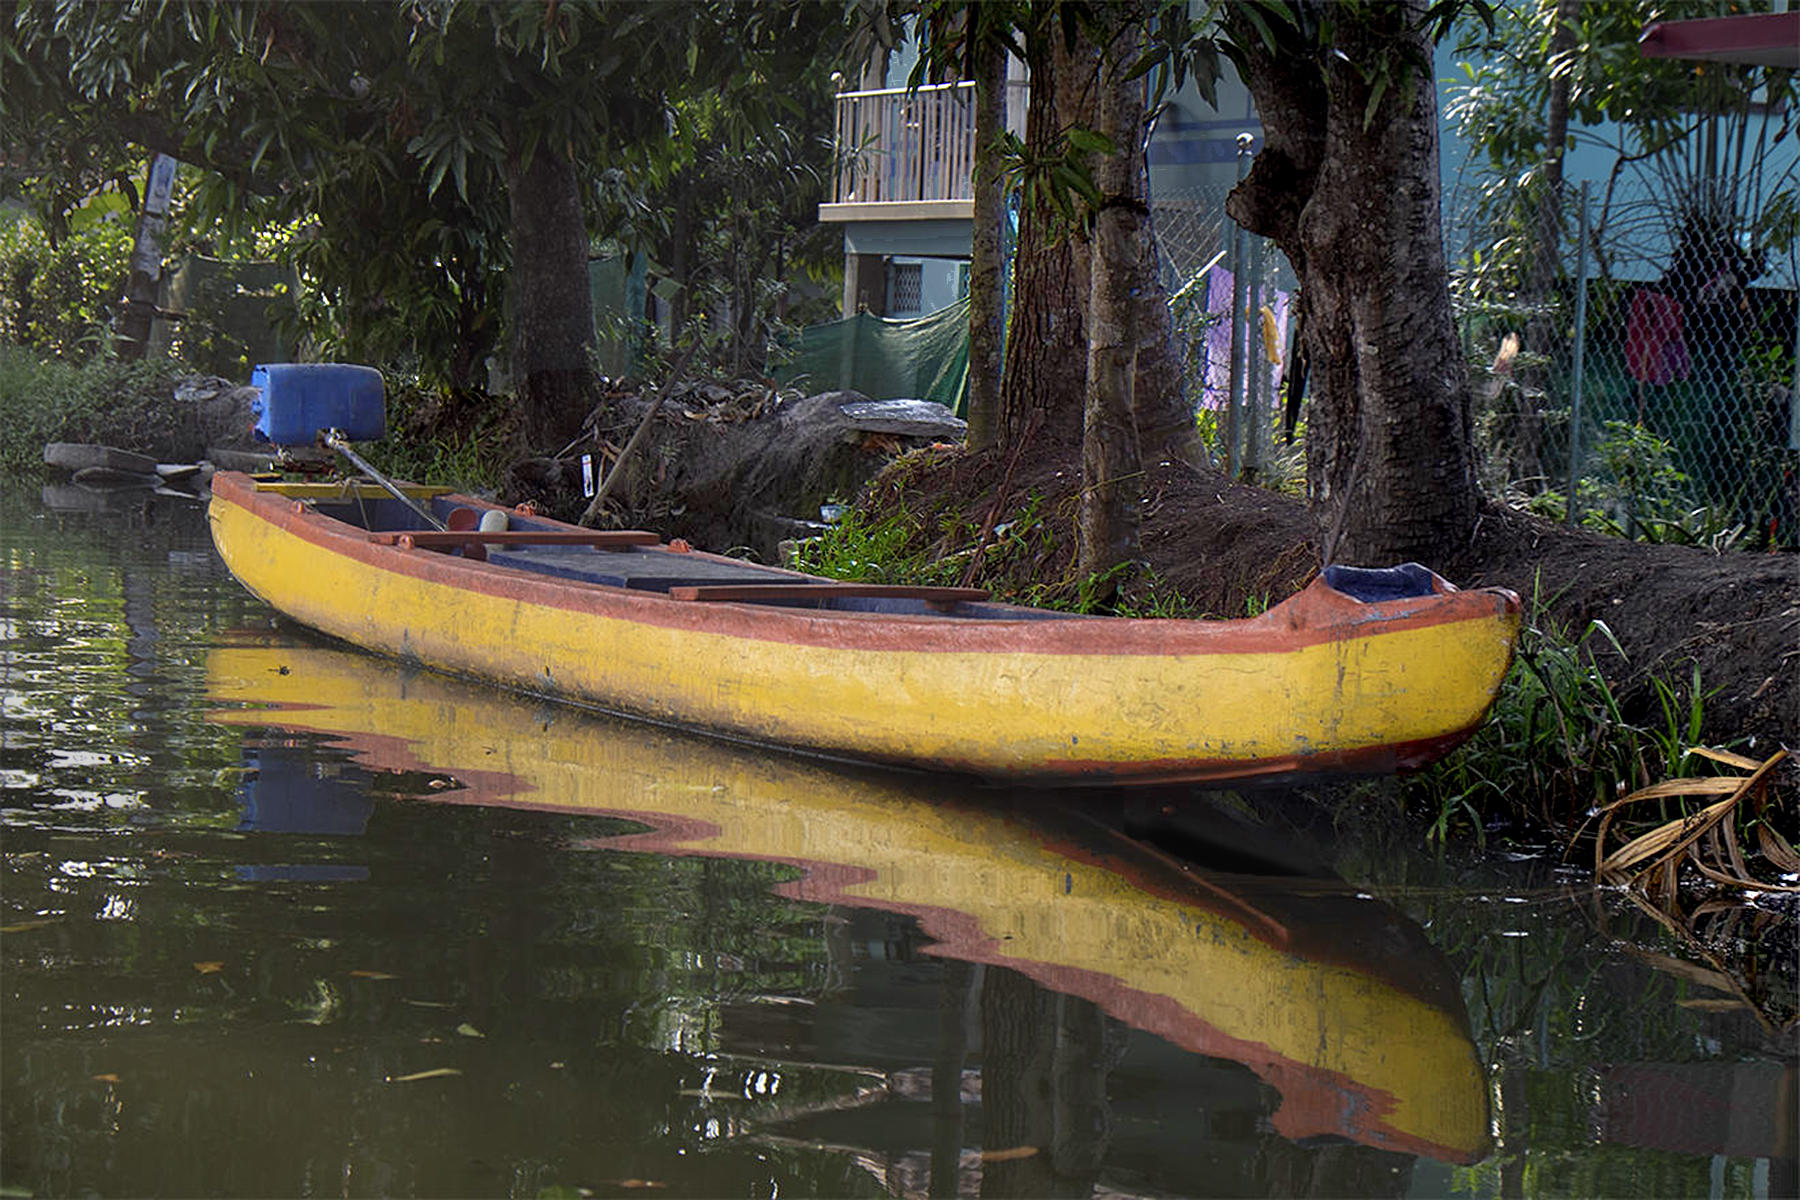 Residential Canal, Kerala Backwaters, Kerala, India<p><a class="nav-link" href="/content.html?page=6/#TA14" target="_top">Thumbnail</a>